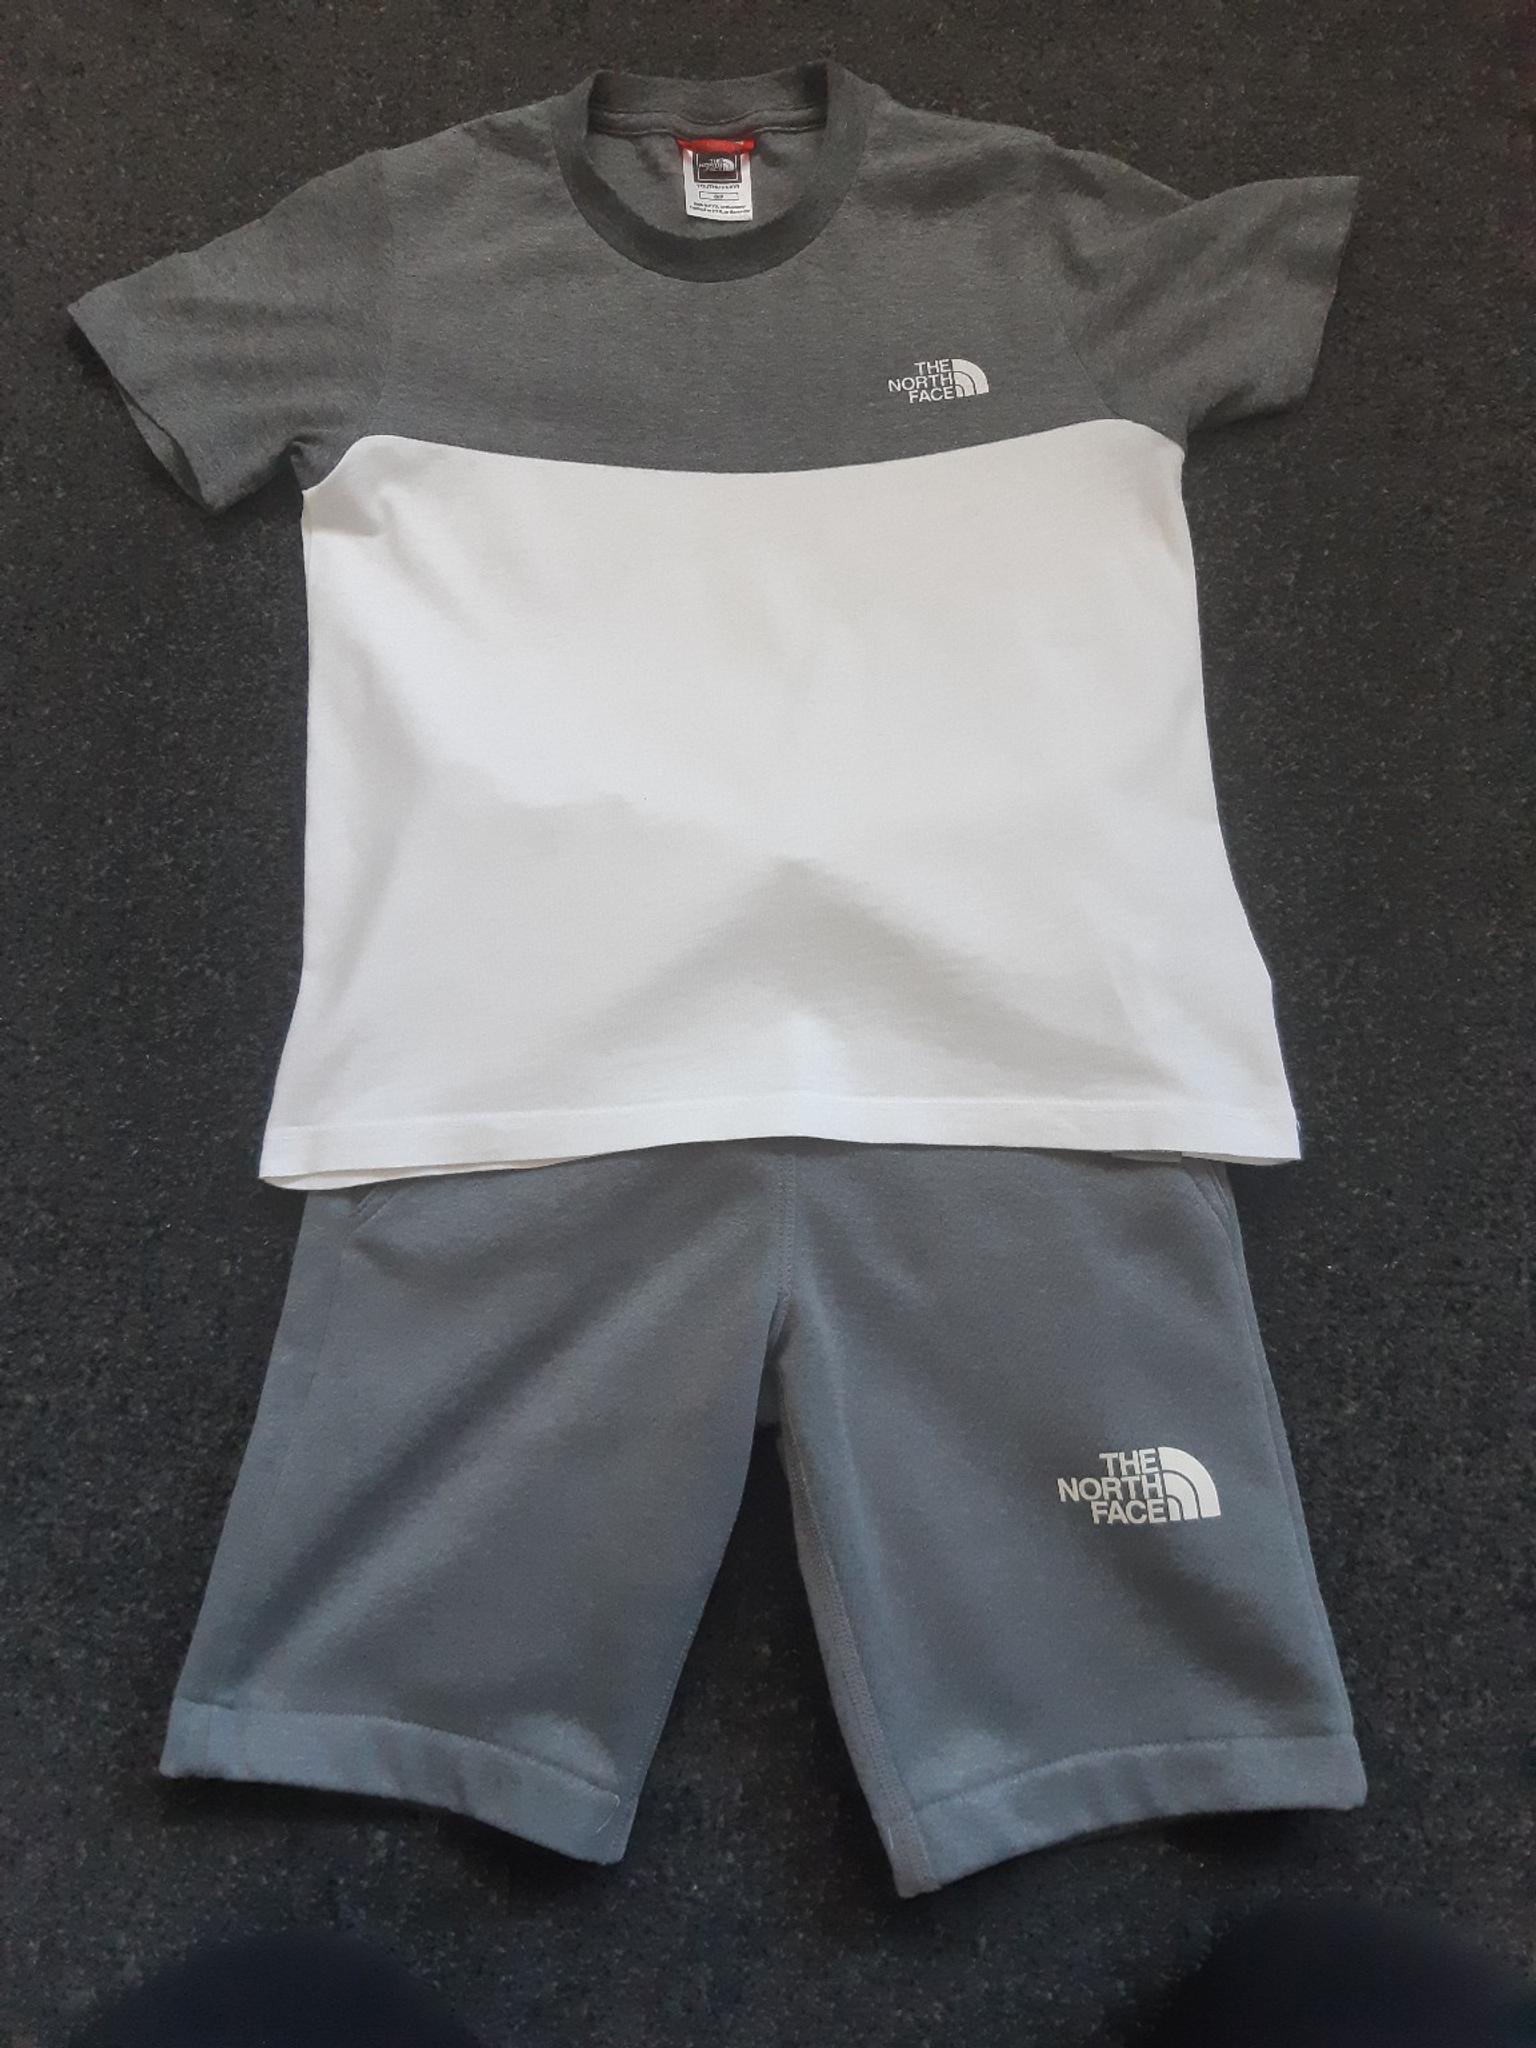 north face shorts and t shirts cheap online